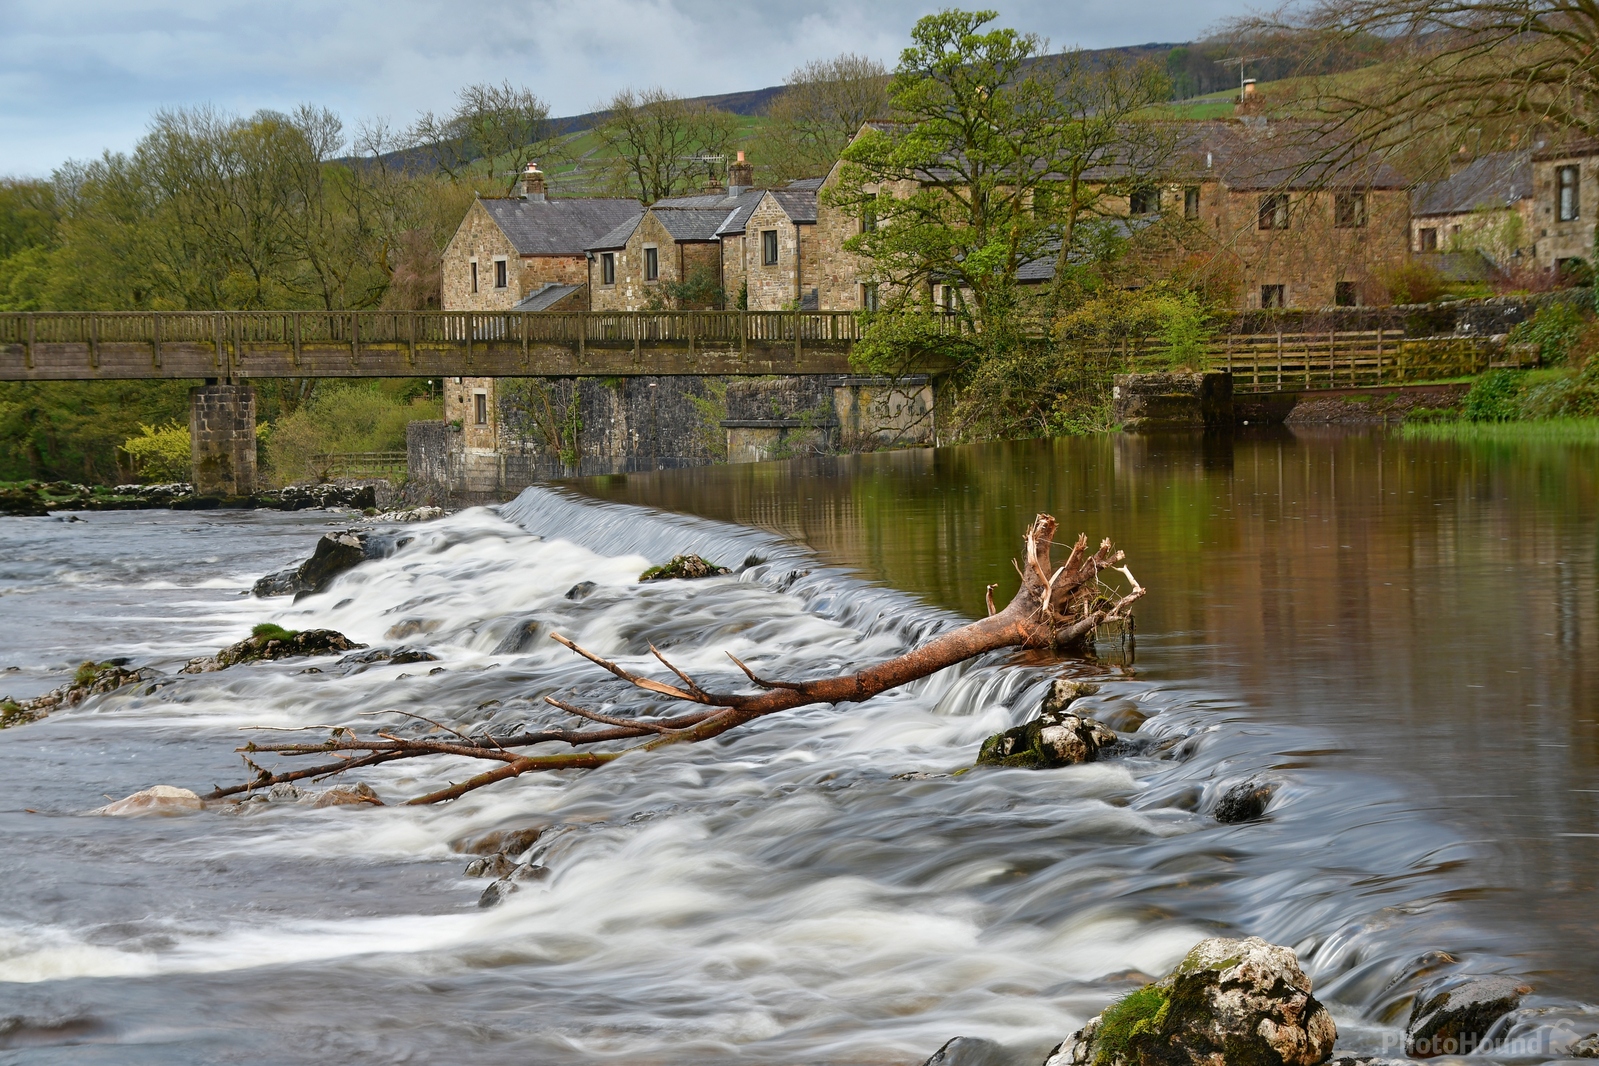 Image of Linton Falls and Weir by Philip Eptlett